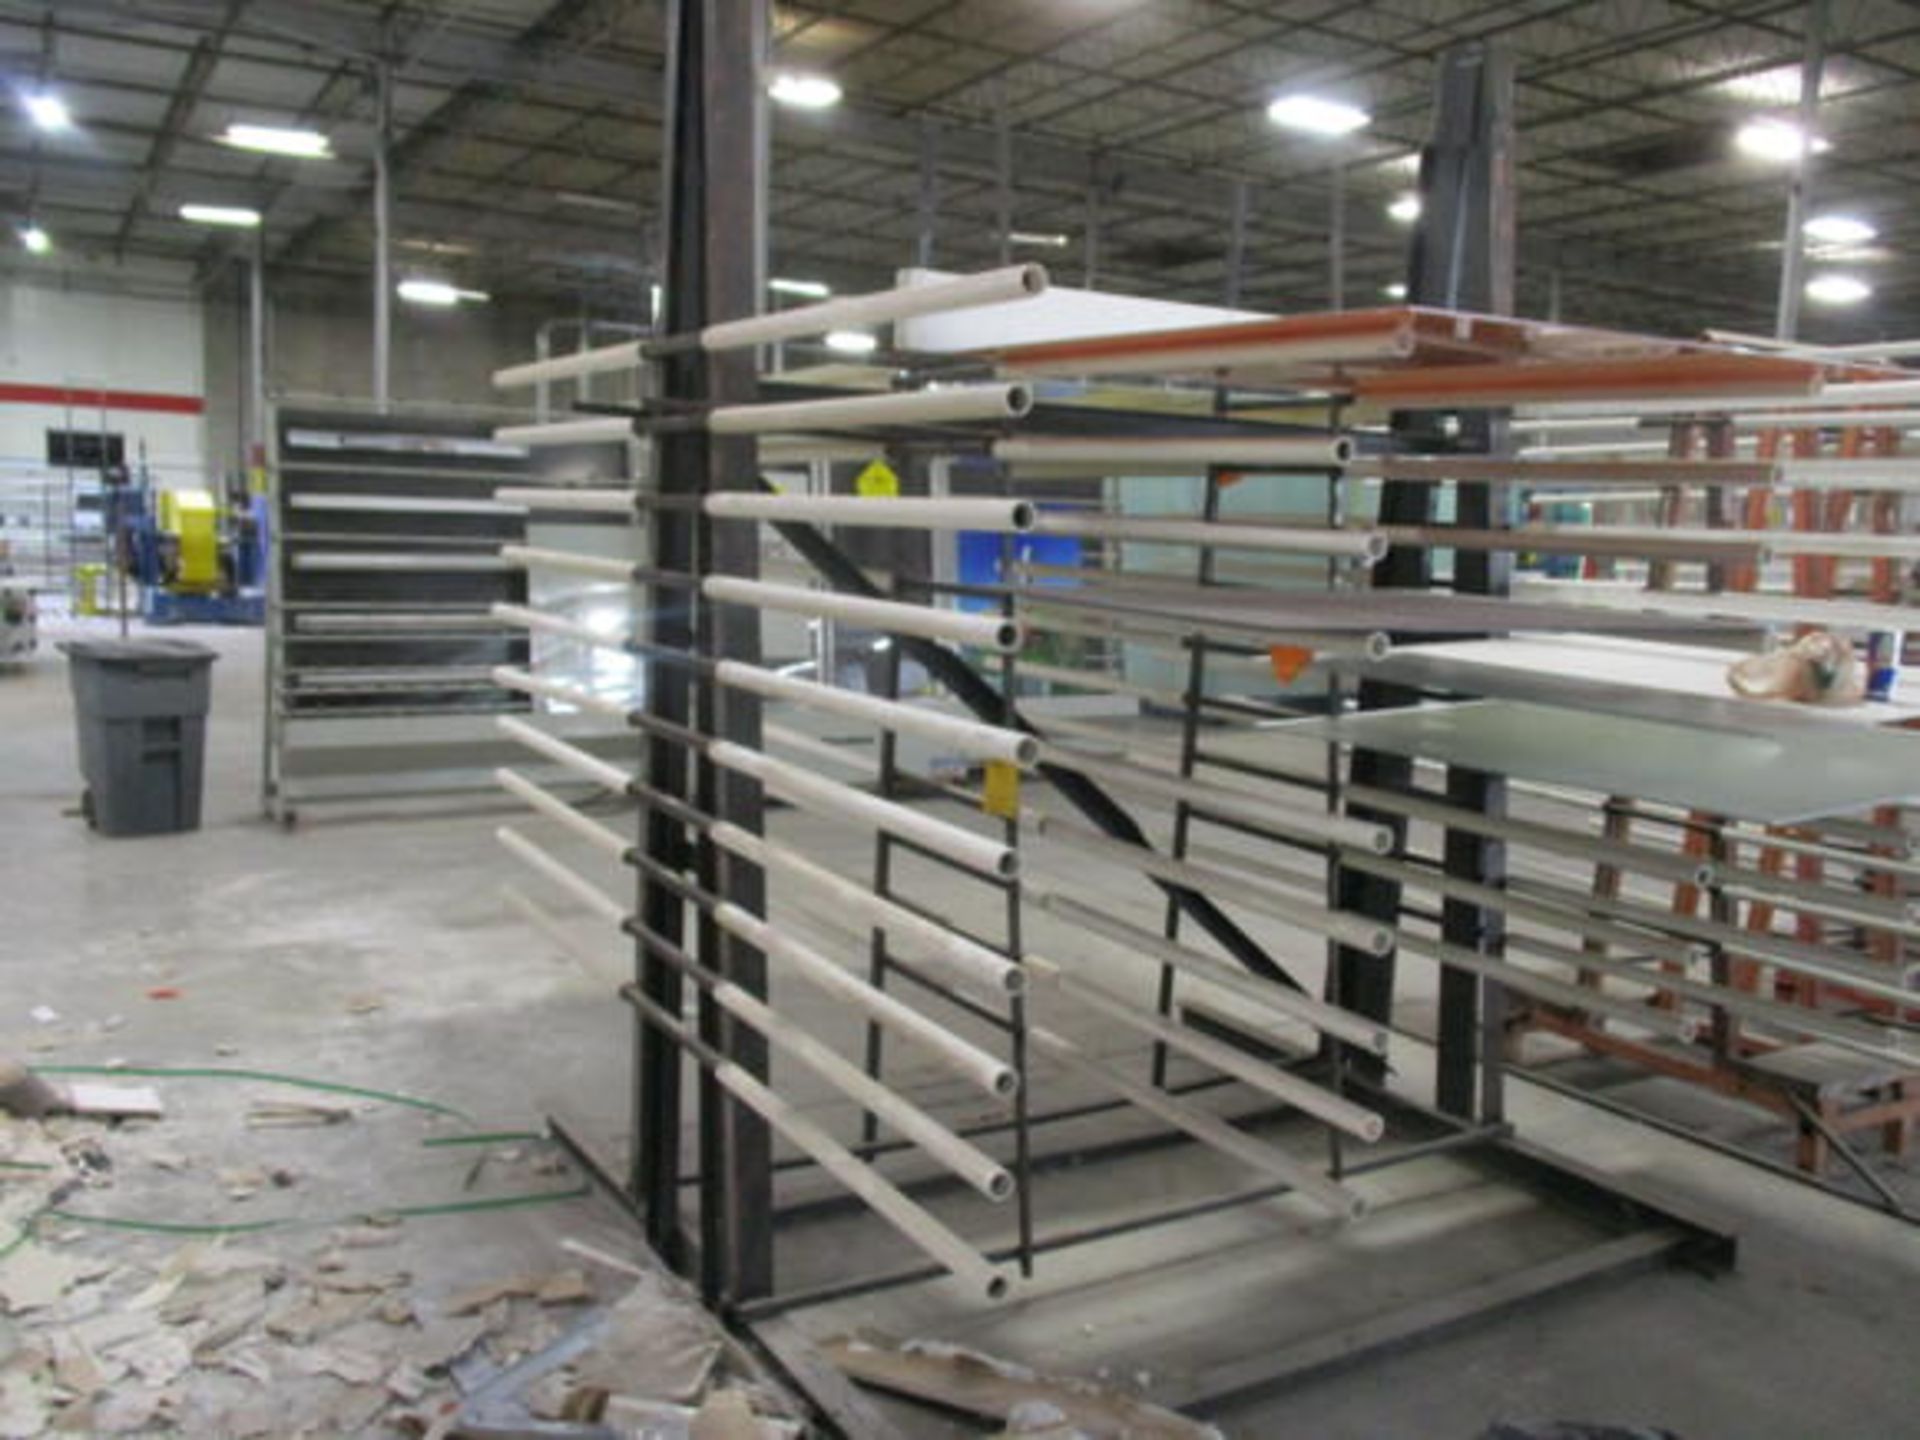 DOUBLE SIDED METAL GLASS RACK, APPROX 10' X 10' X 8' W/ HORIZONTAL HOLDER WELDED ON ONE SIDE